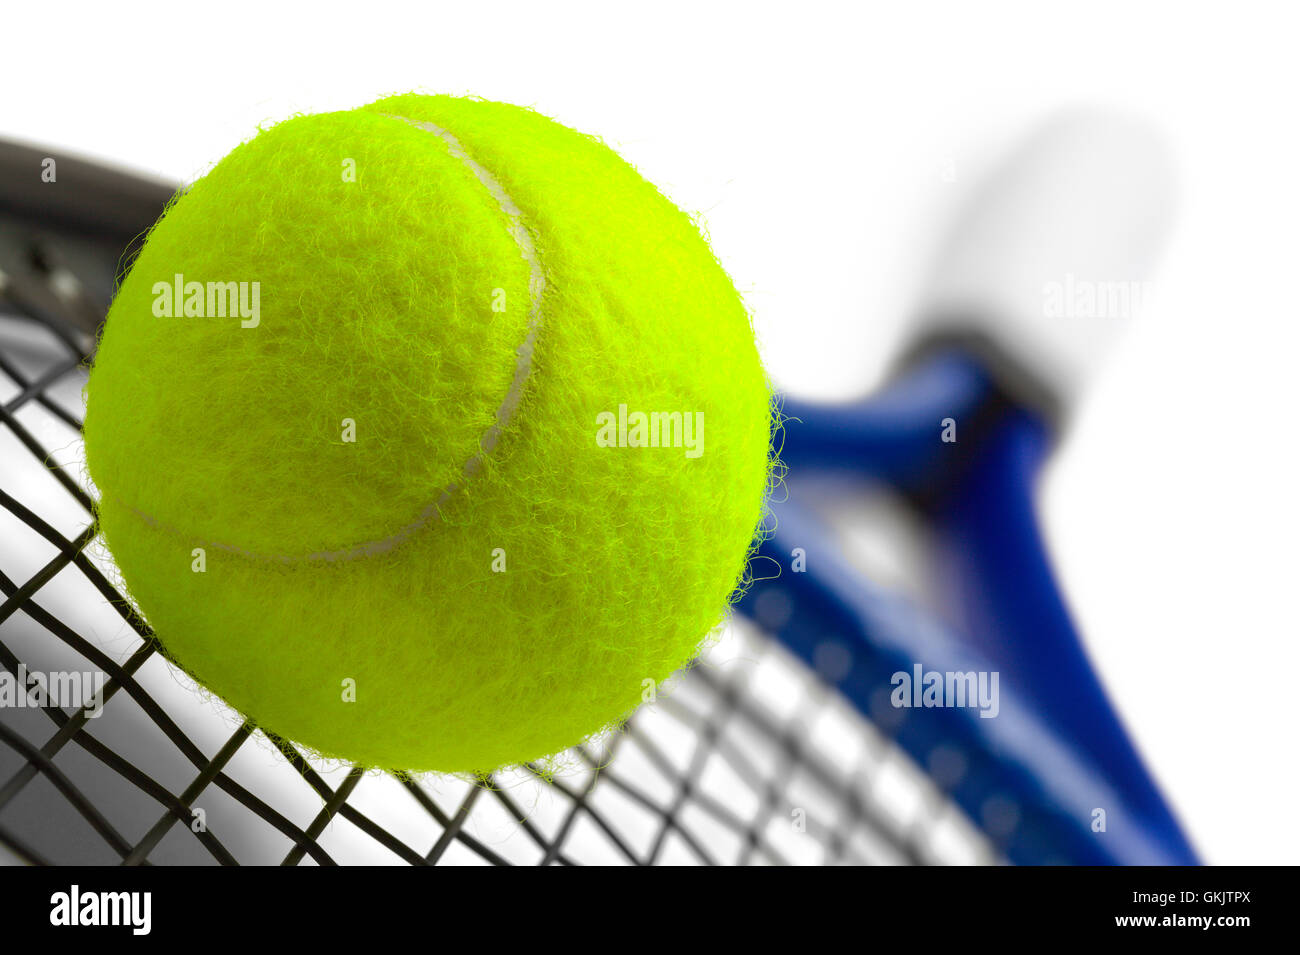 Blue and Black Tennis Racket with Green Ball Isolated on White Background. Stock Photo